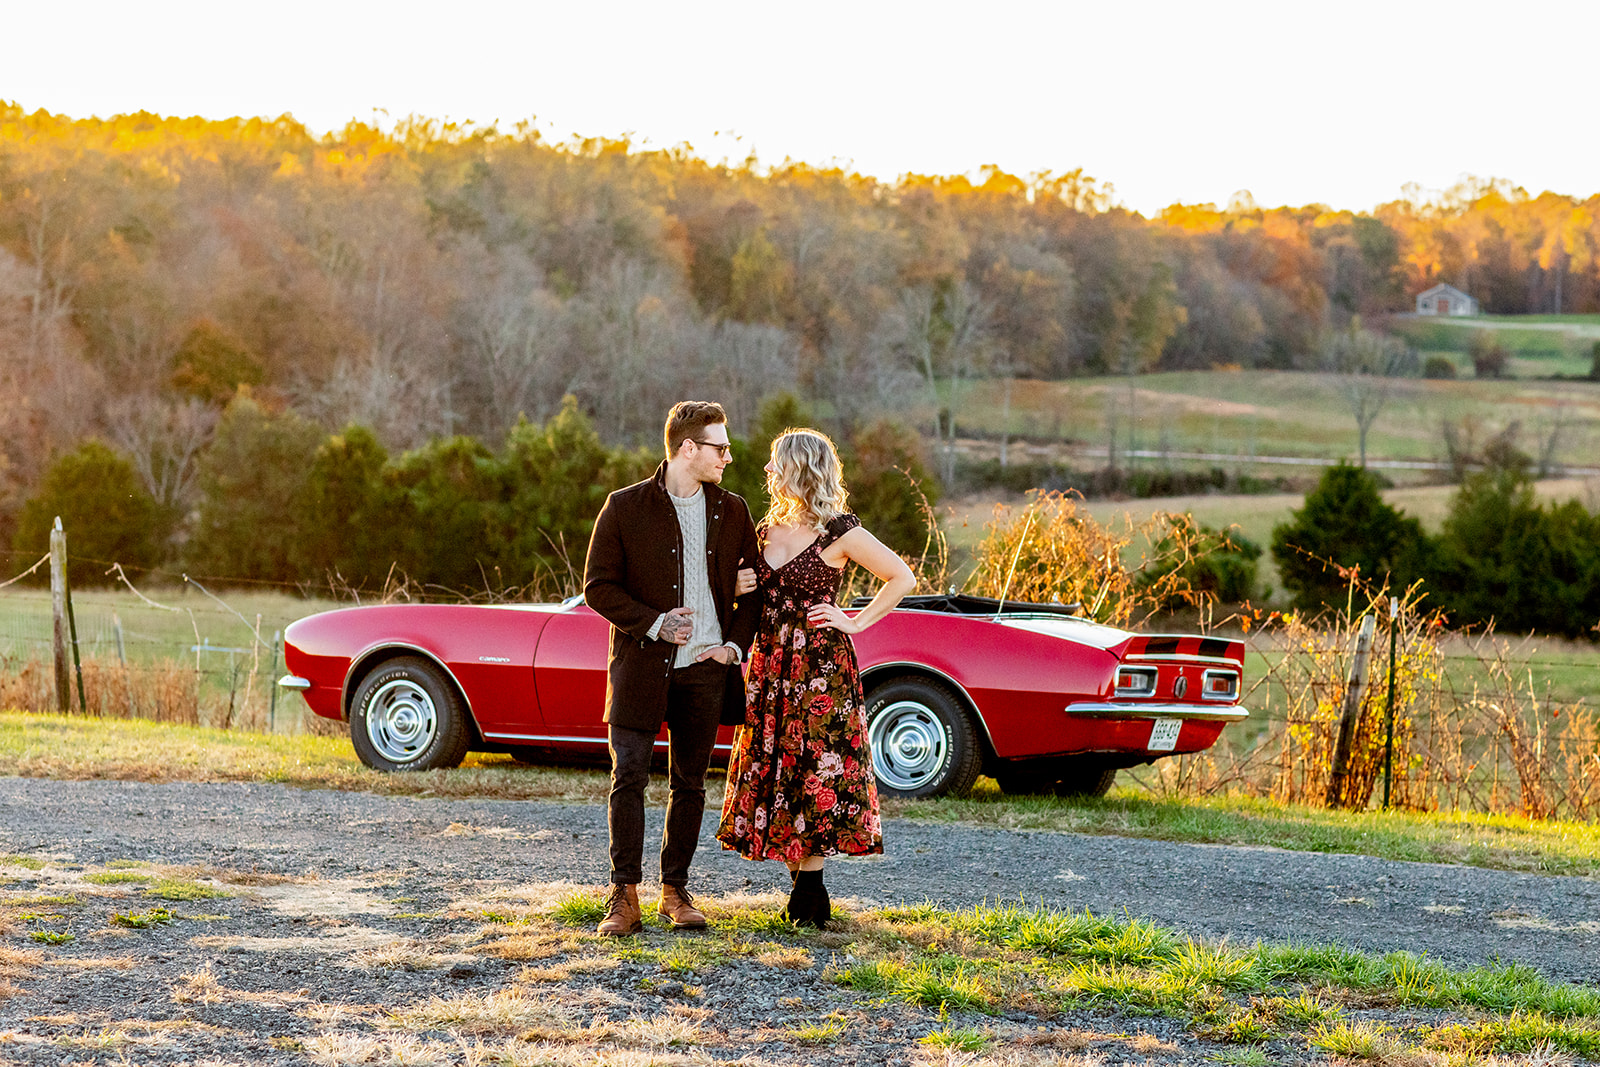 Bogue Family Photos with a Vintage Red Camaro - Image Property of www.j-dphoto.com